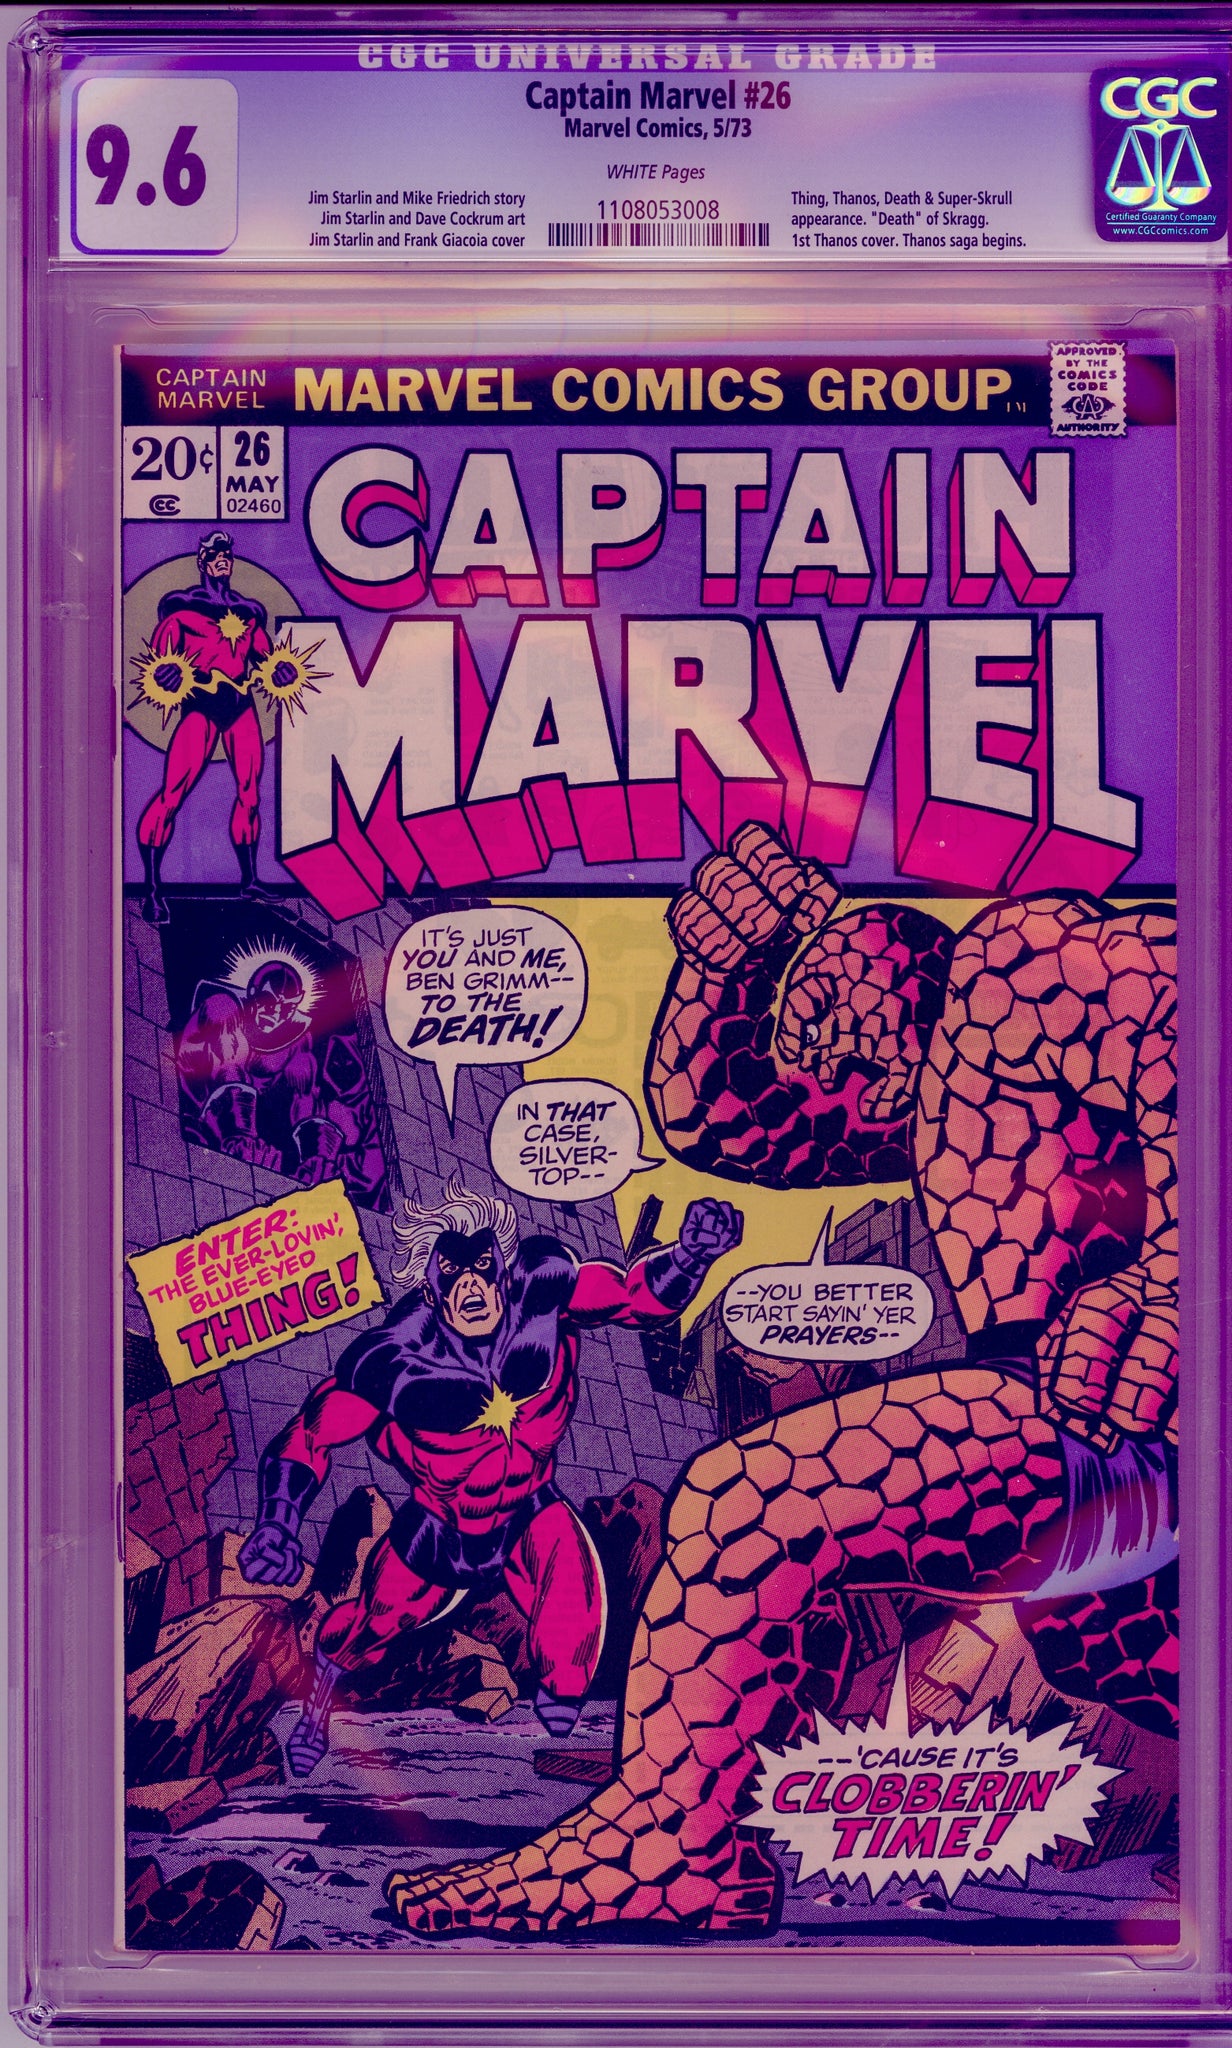 Captain Marvel #26 (1973) Thanos, Thing, Death, and Super Skrull